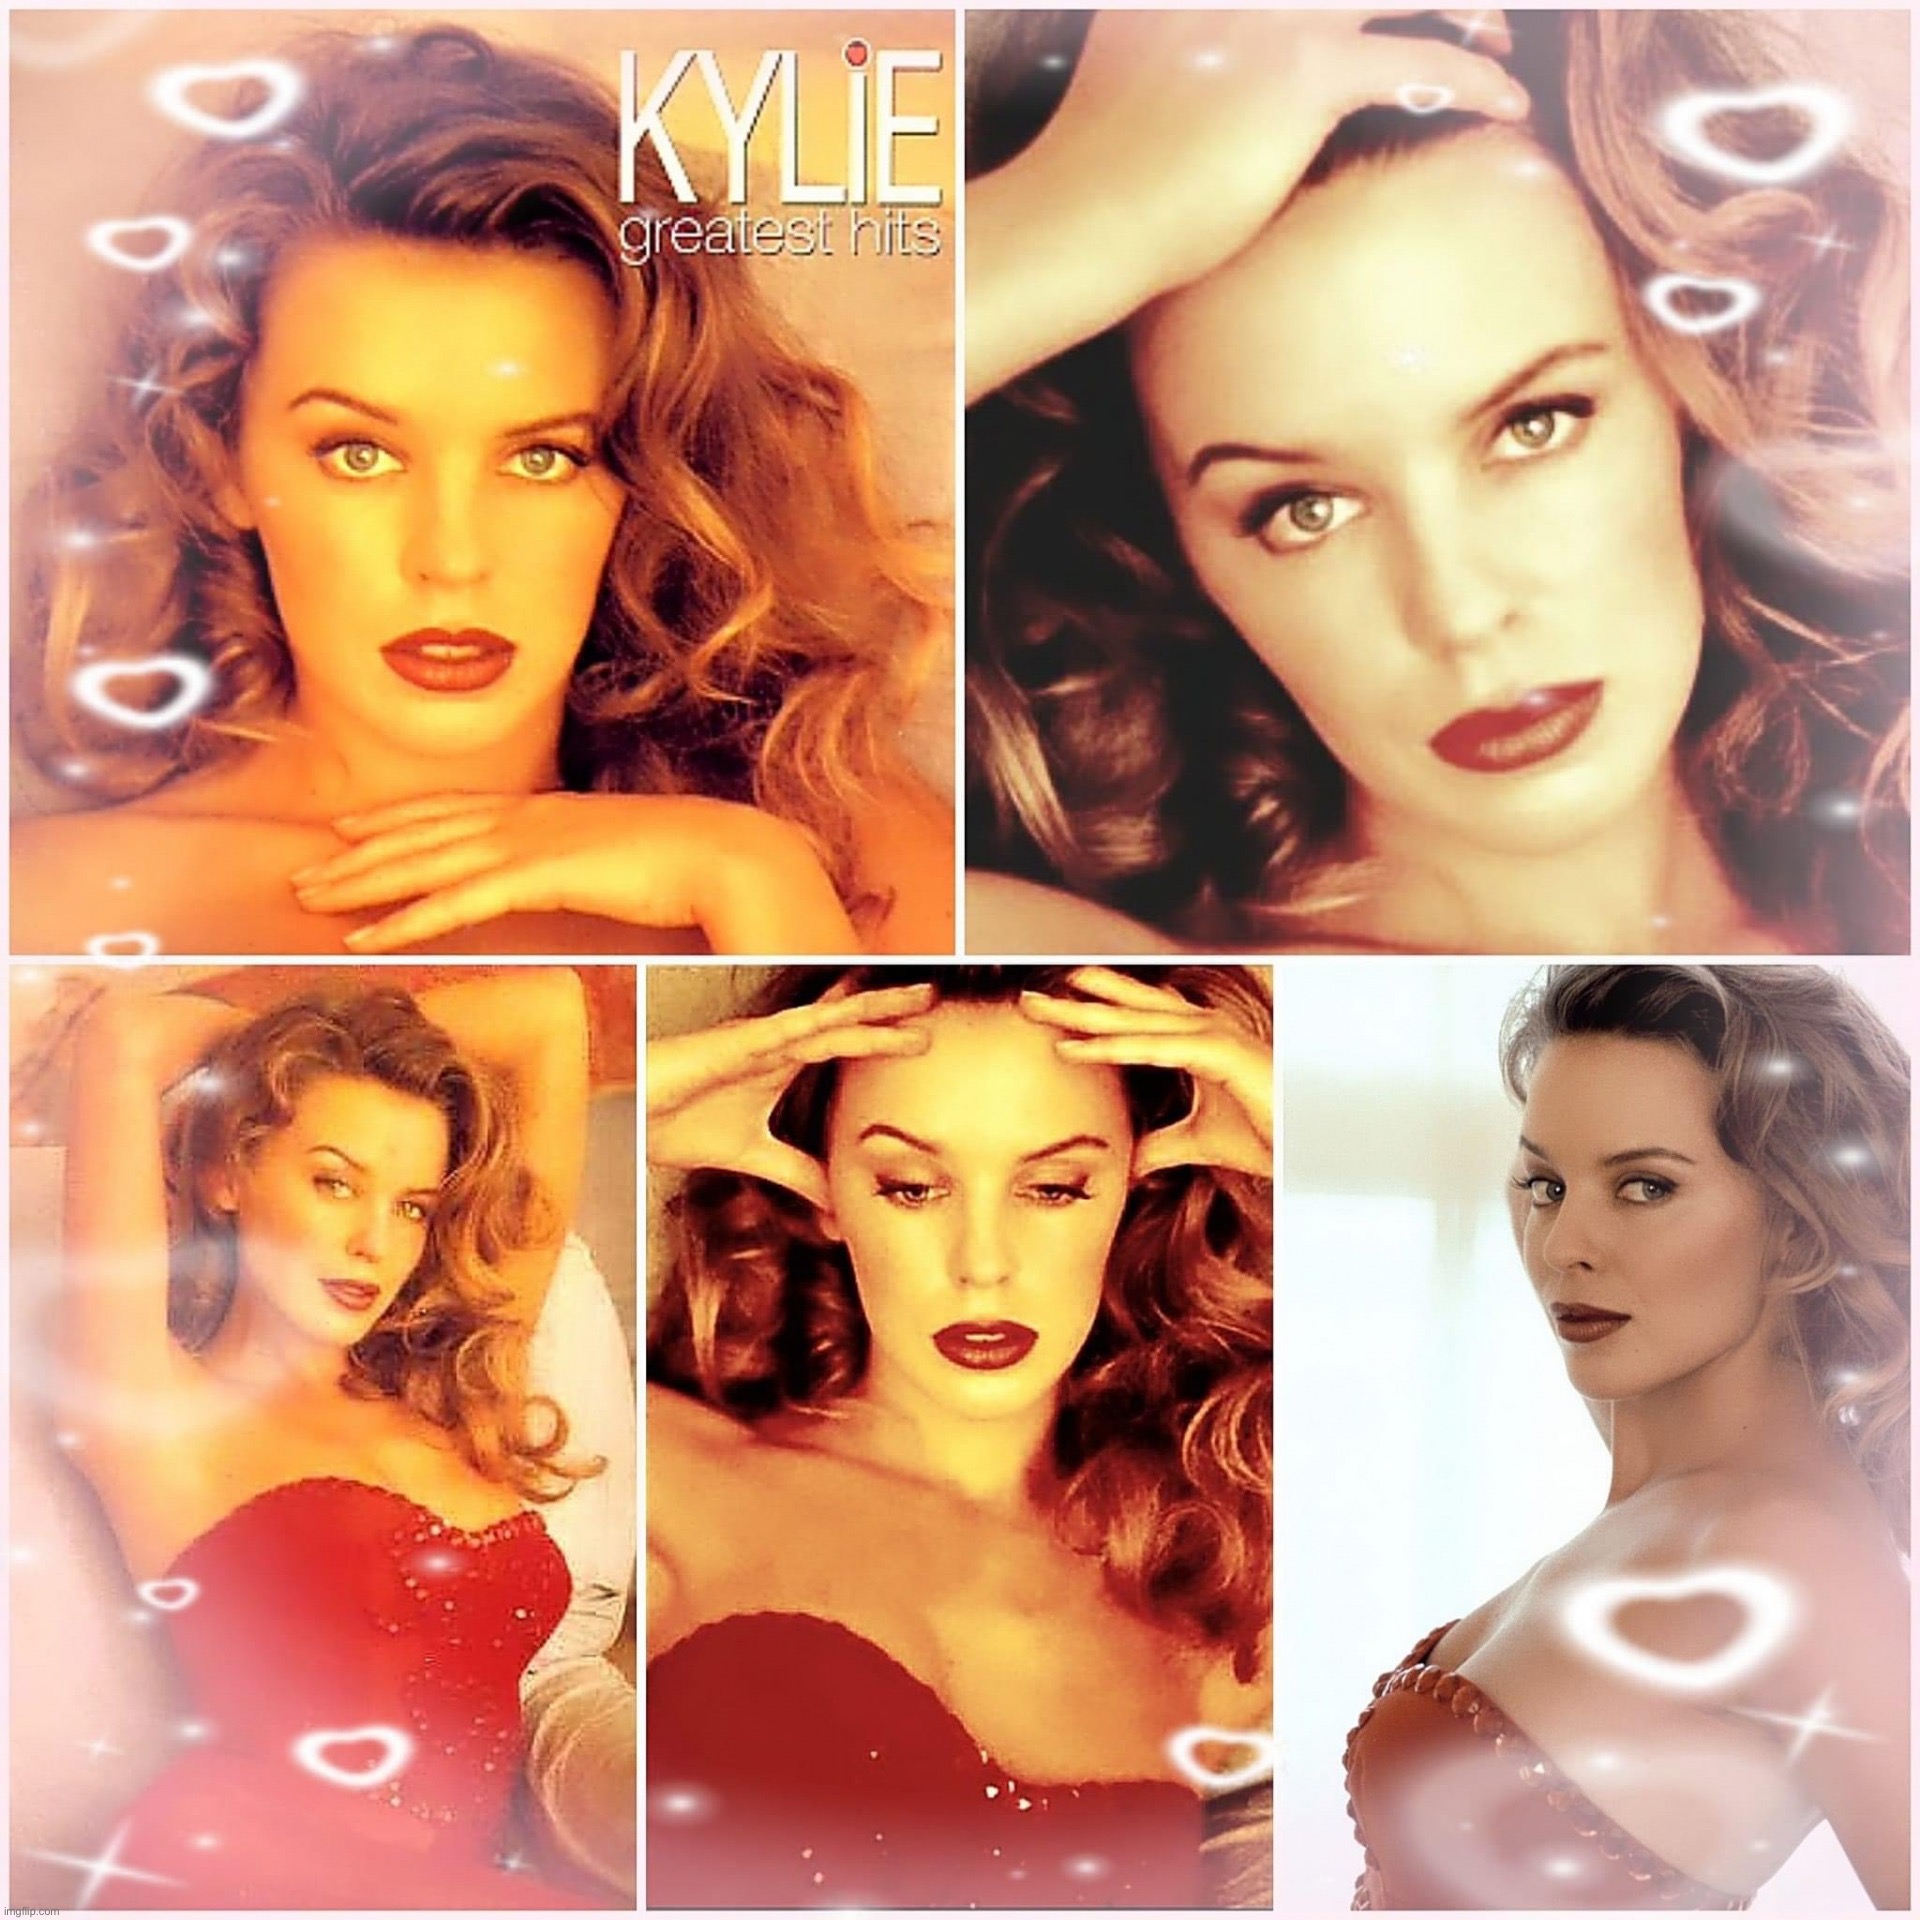 Kylie greatest hits | image tagged in kylie greatest hits | made w/ Imgflip meme maker